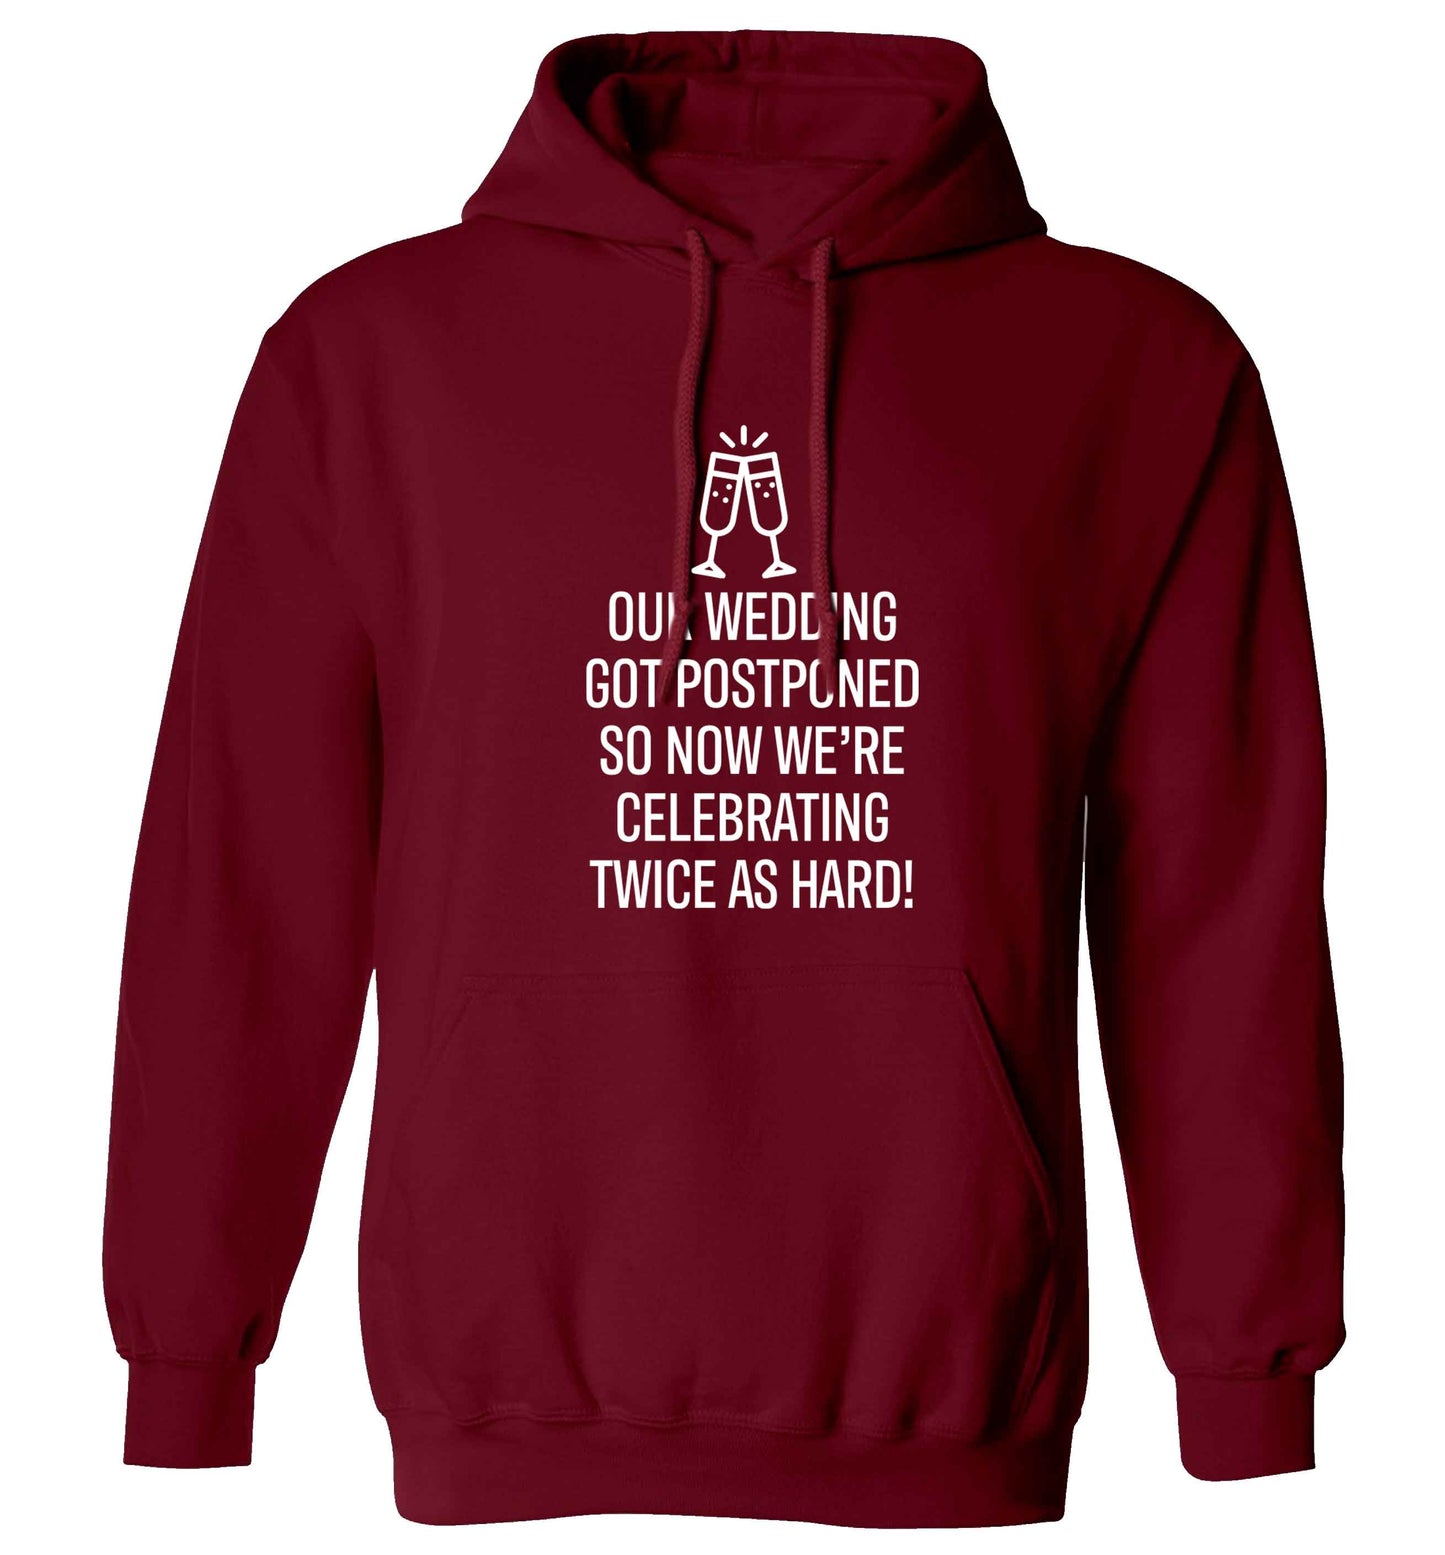 Postponed wedding? Sounds like an excuse to party twice as hard!  adults unisex maroon hoodie 2XL